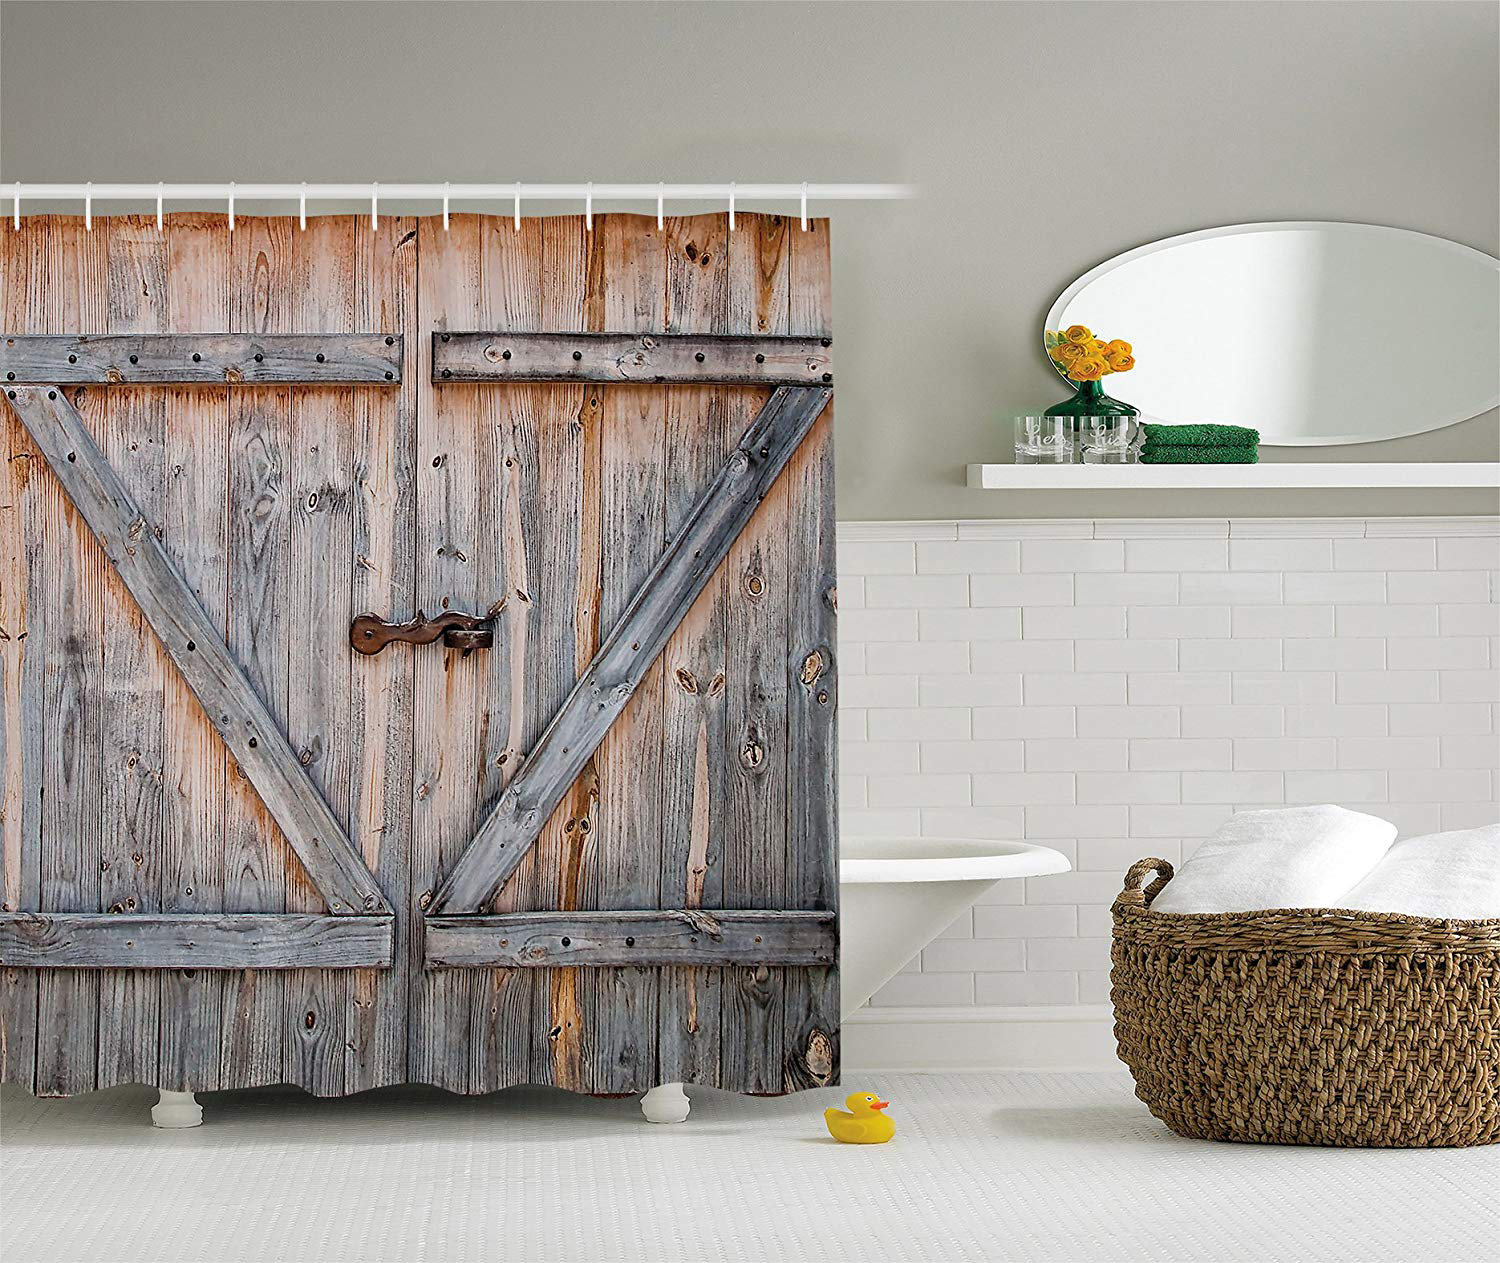 Details about   Rustic Wooden Barn Door Western Shower Curtain Bath Curtain Waterproof Fabric